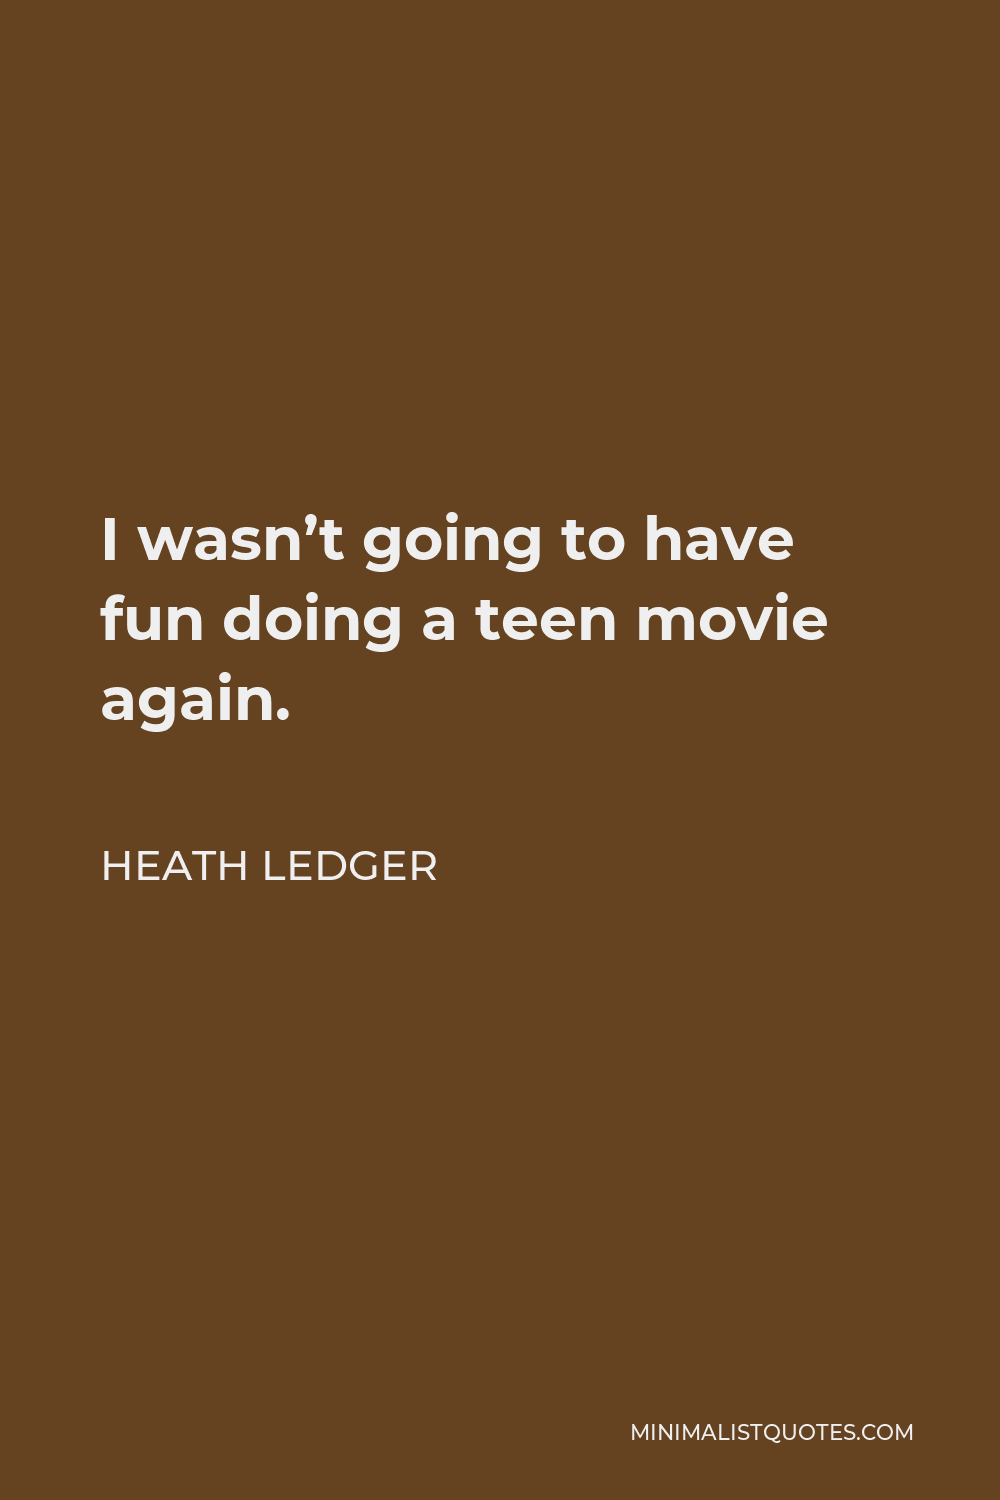 Heath Ledger Quote - I wasn’t going to have fun doing a teen movie again.